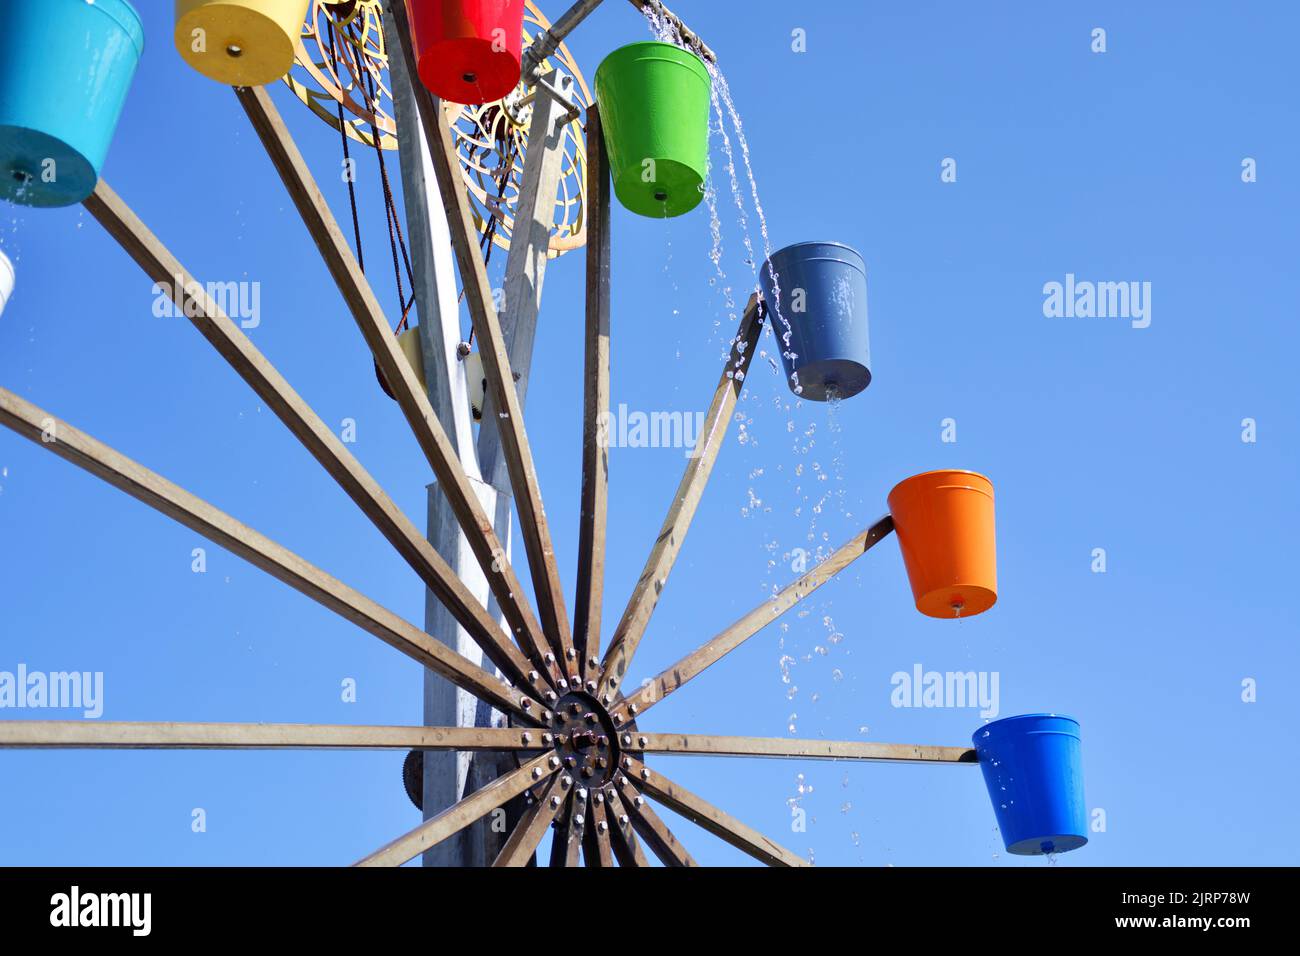 Colorful Buckets of watermill Stock Photo